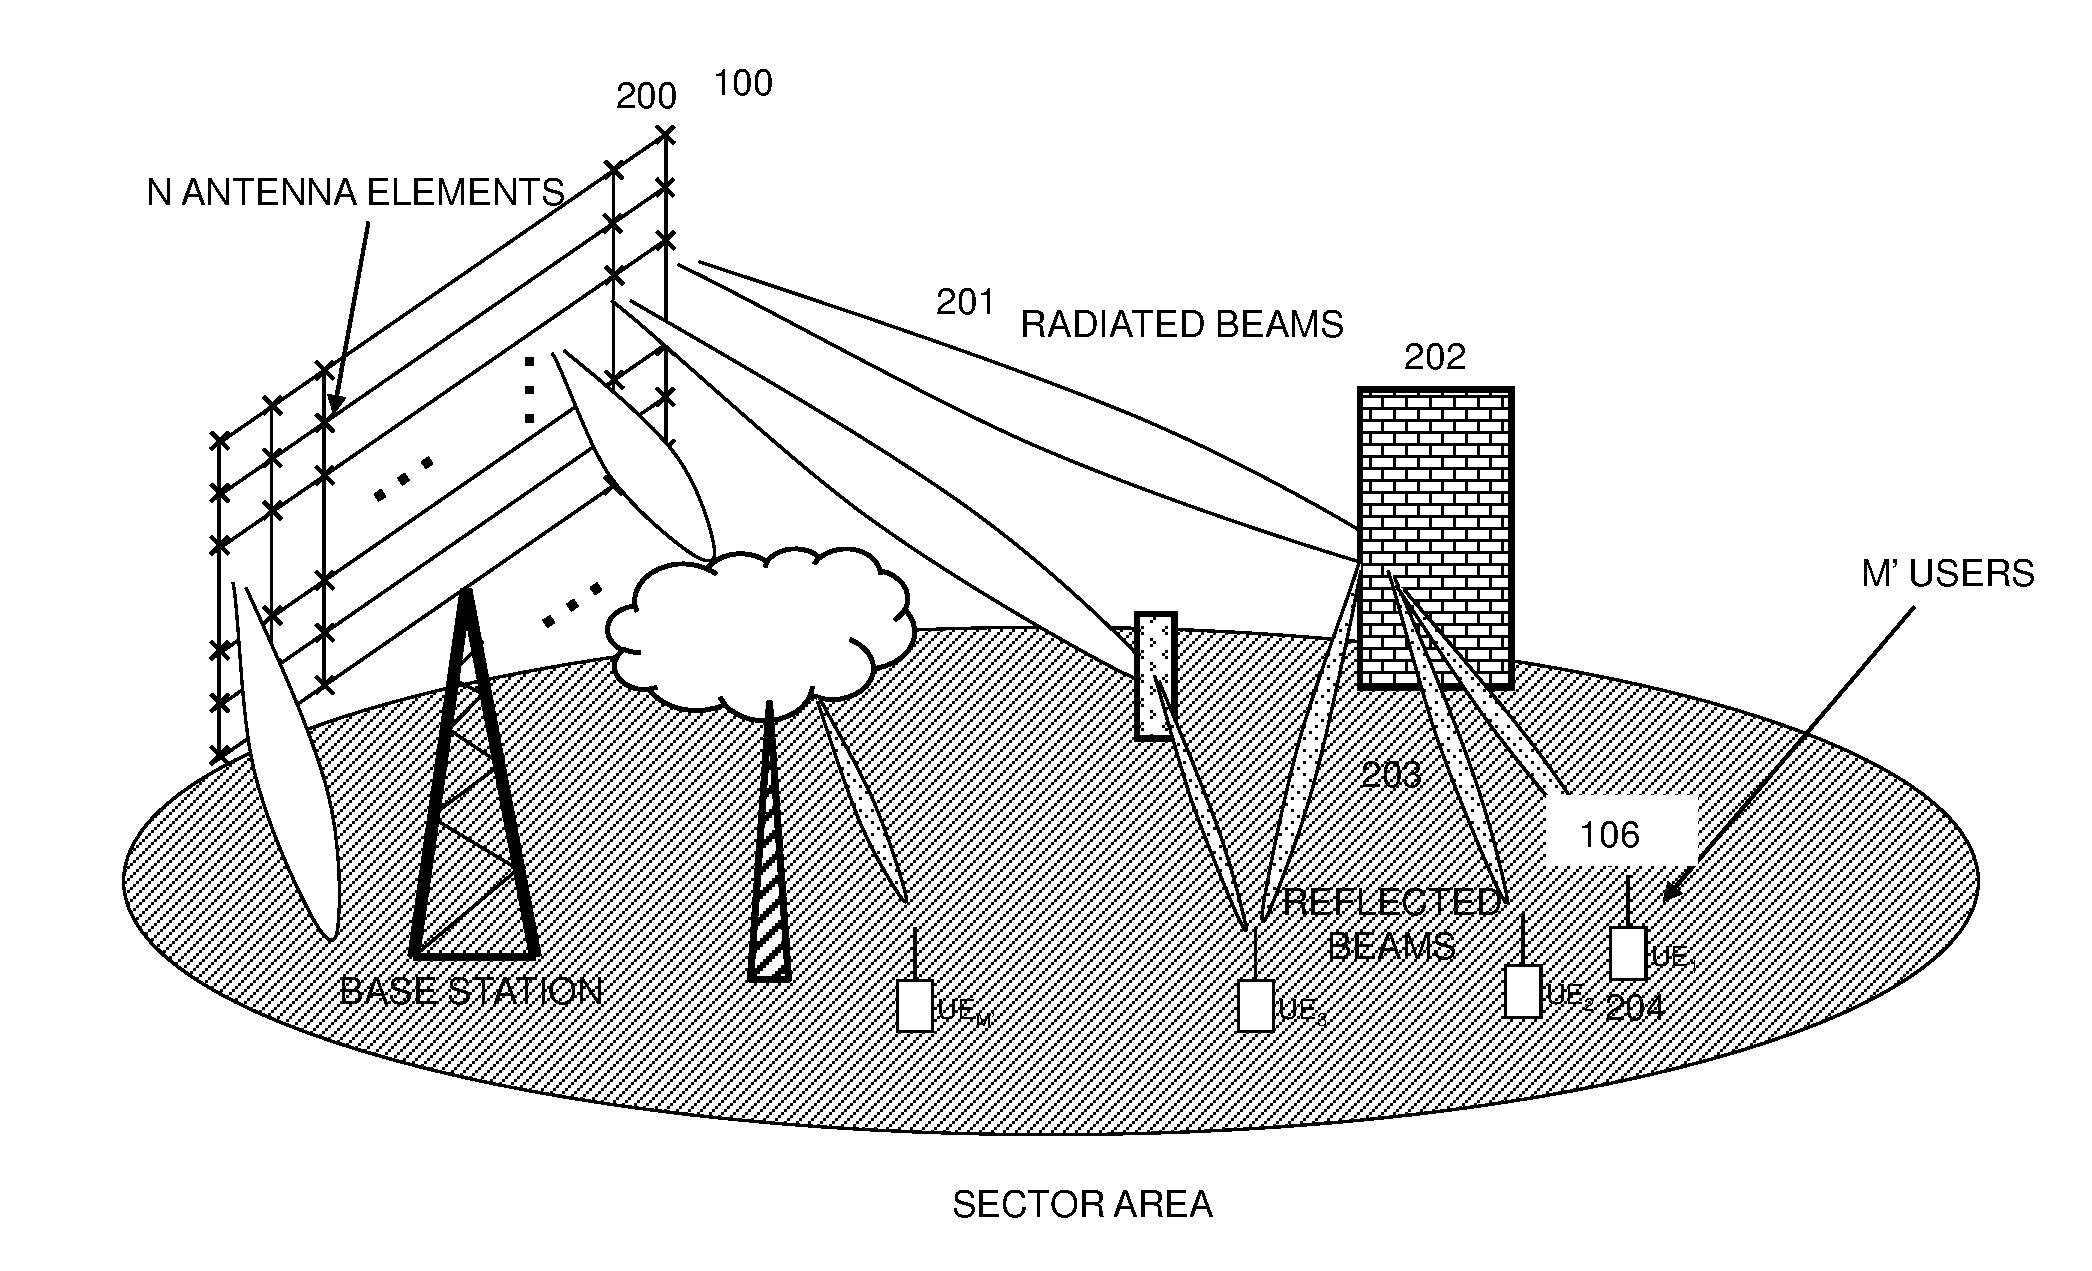 Method for performing multiple access in wireless OFDM cellular systems over multipath wireless channels considering both space and frequency domains, base station and computer programs thereof